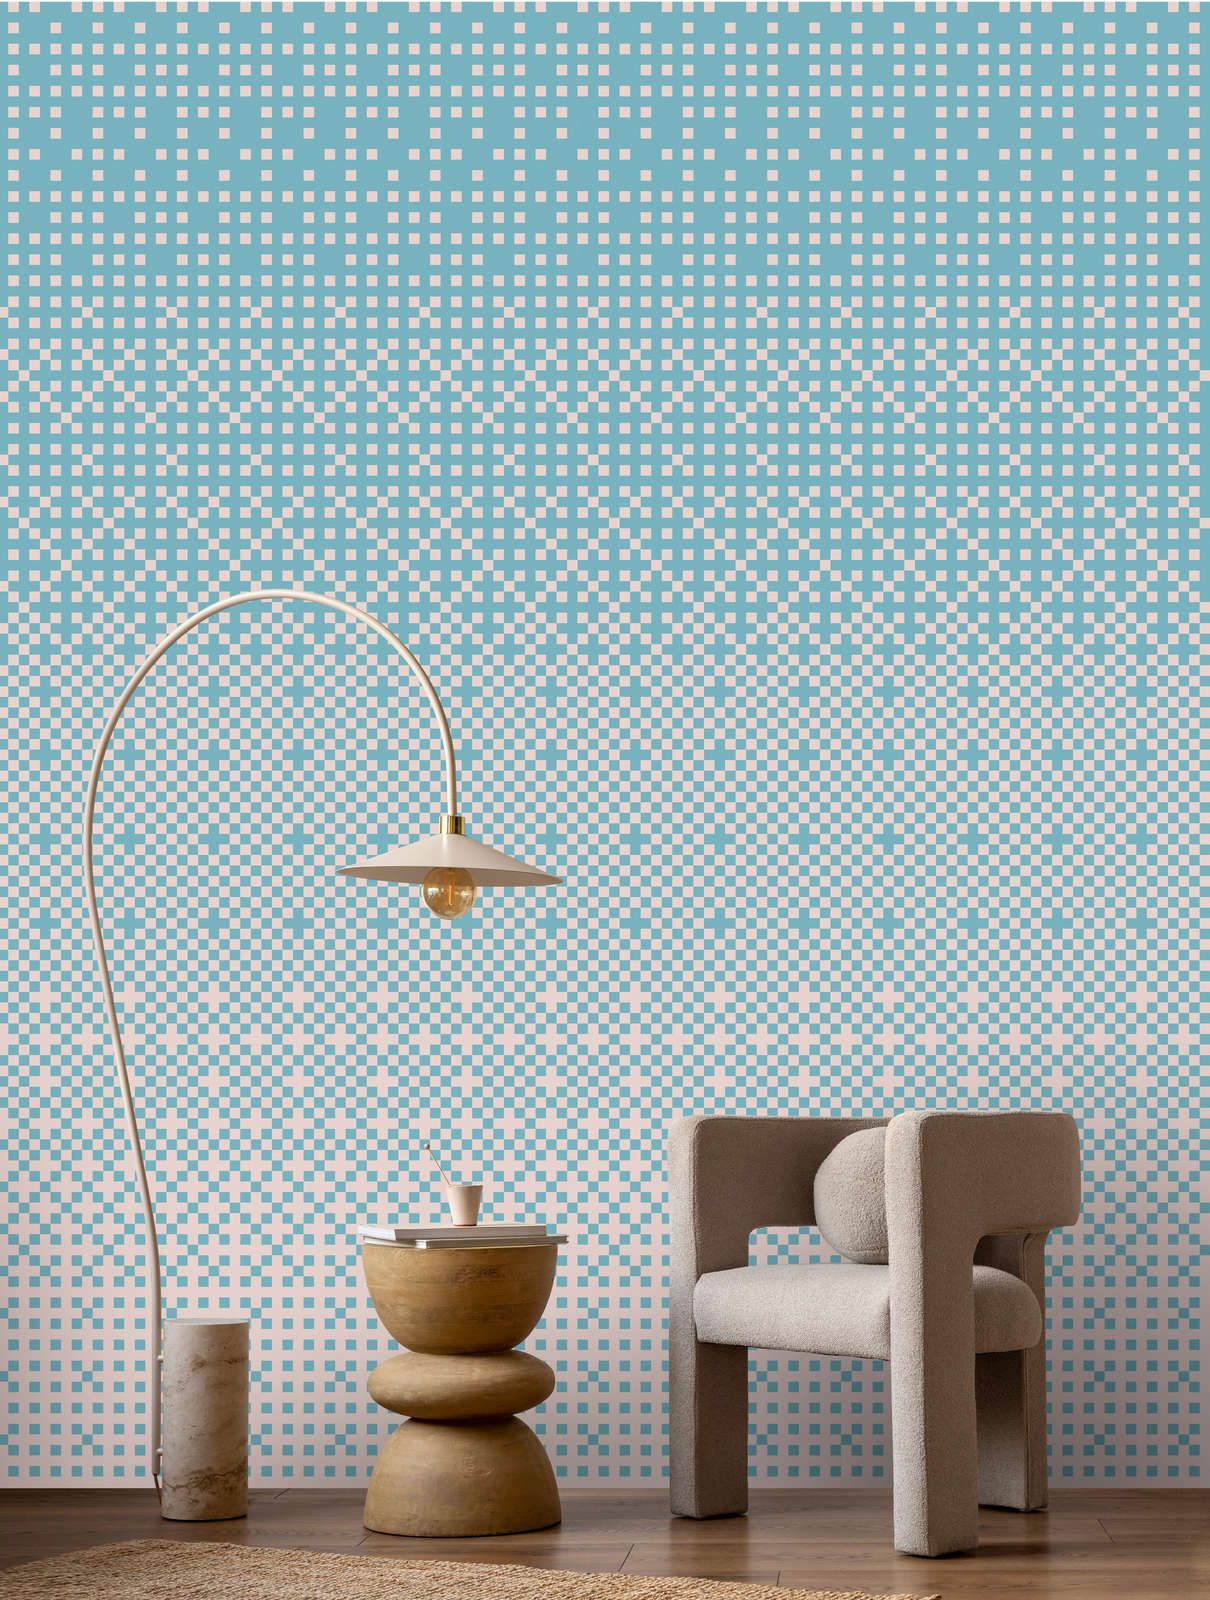             Photo wallpaper »pixi blue« - Cross stitch pattern with pixel style - Blue | Smooth, slightly shiny premium non-woven fabric
        